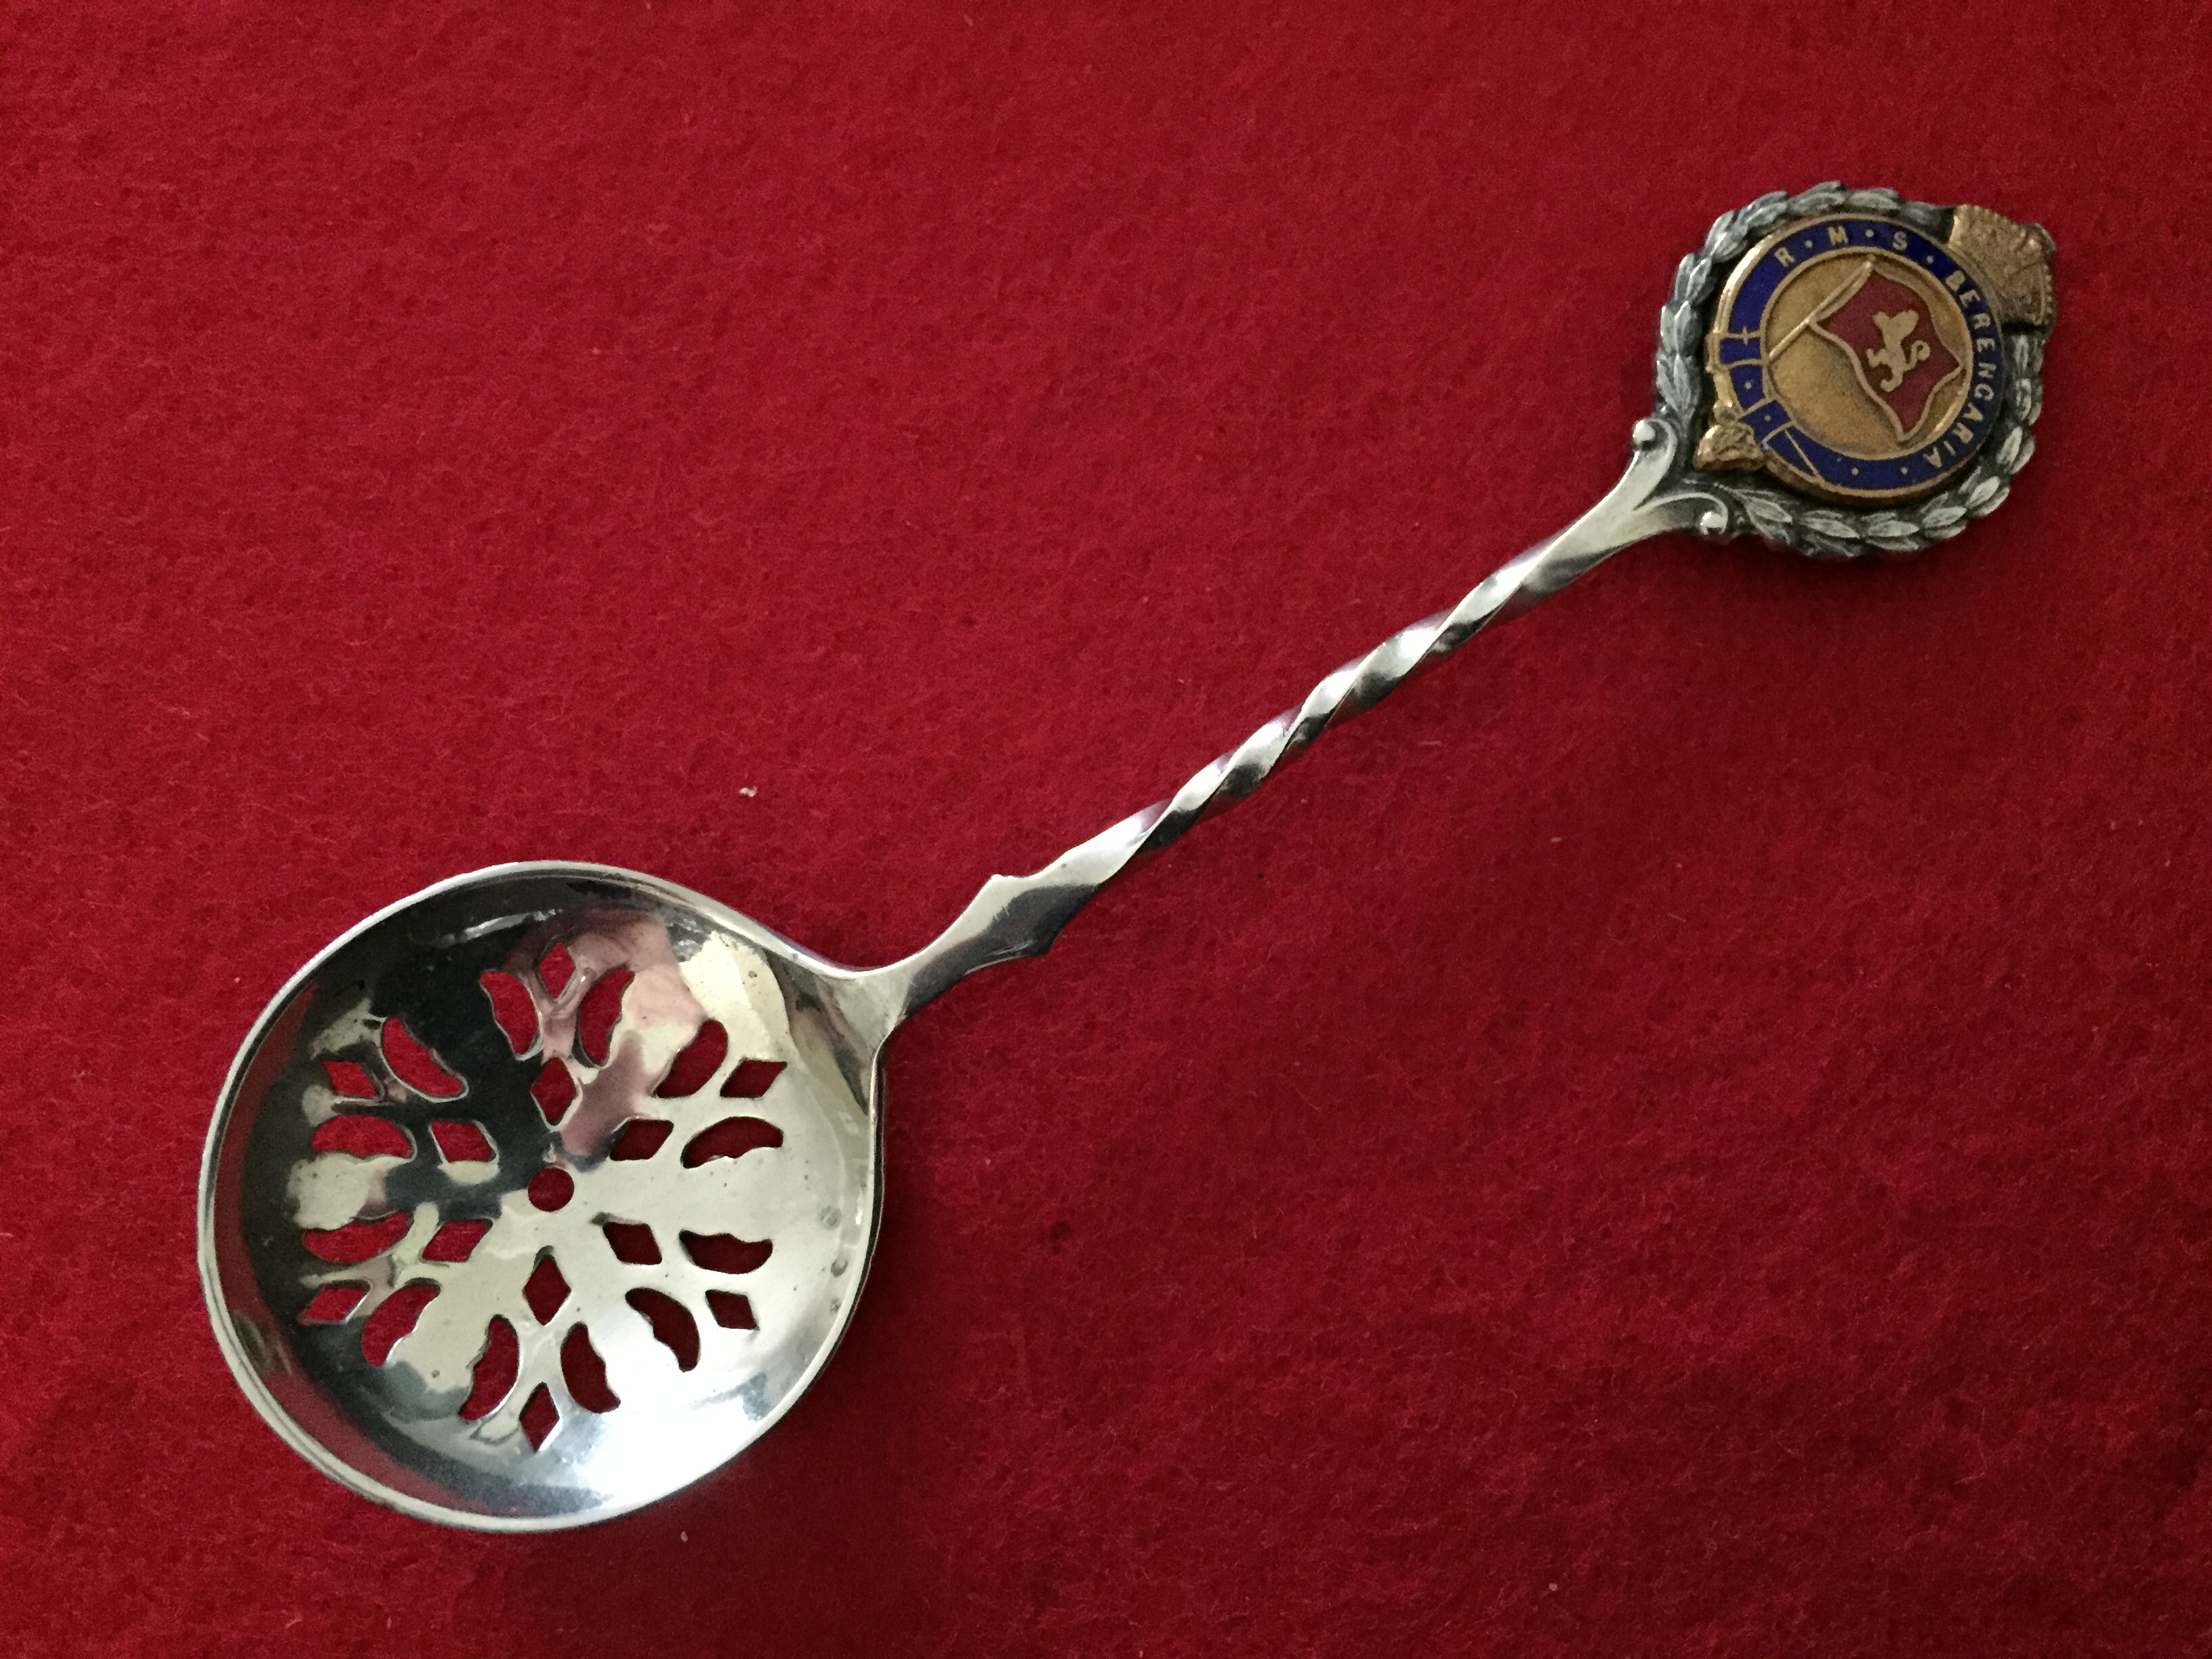 SOUVENIR SUGAR SIFTER SPOON FROM THE OLD VESSEL THE BERENGARIA